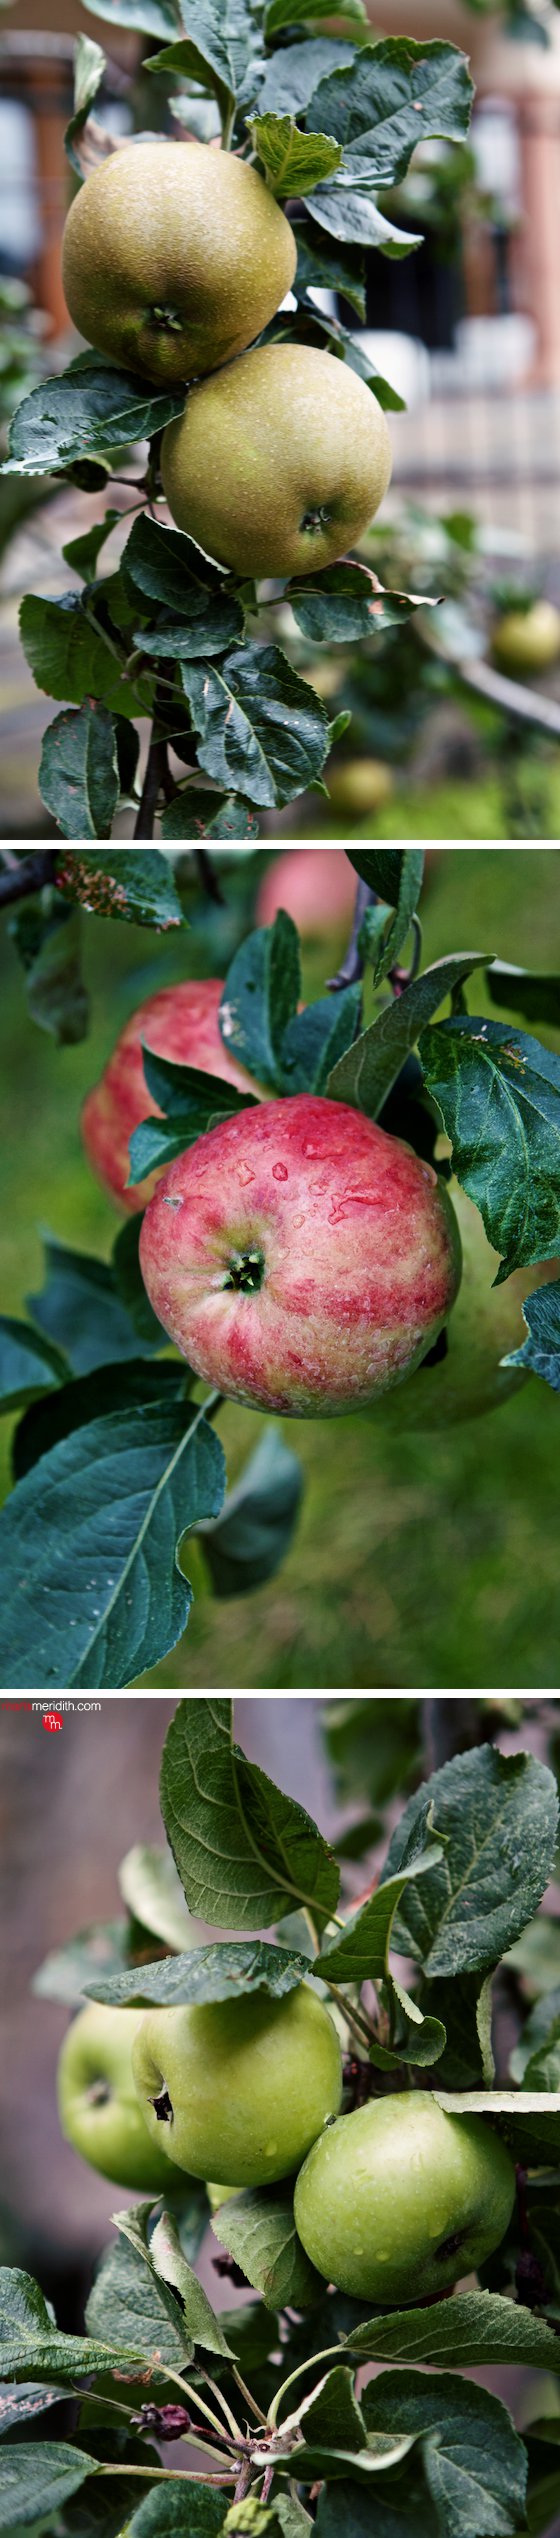 Apple love in the South Tyrol! Vols, Italy. MarlaMeridith.com ( @marlameridith )